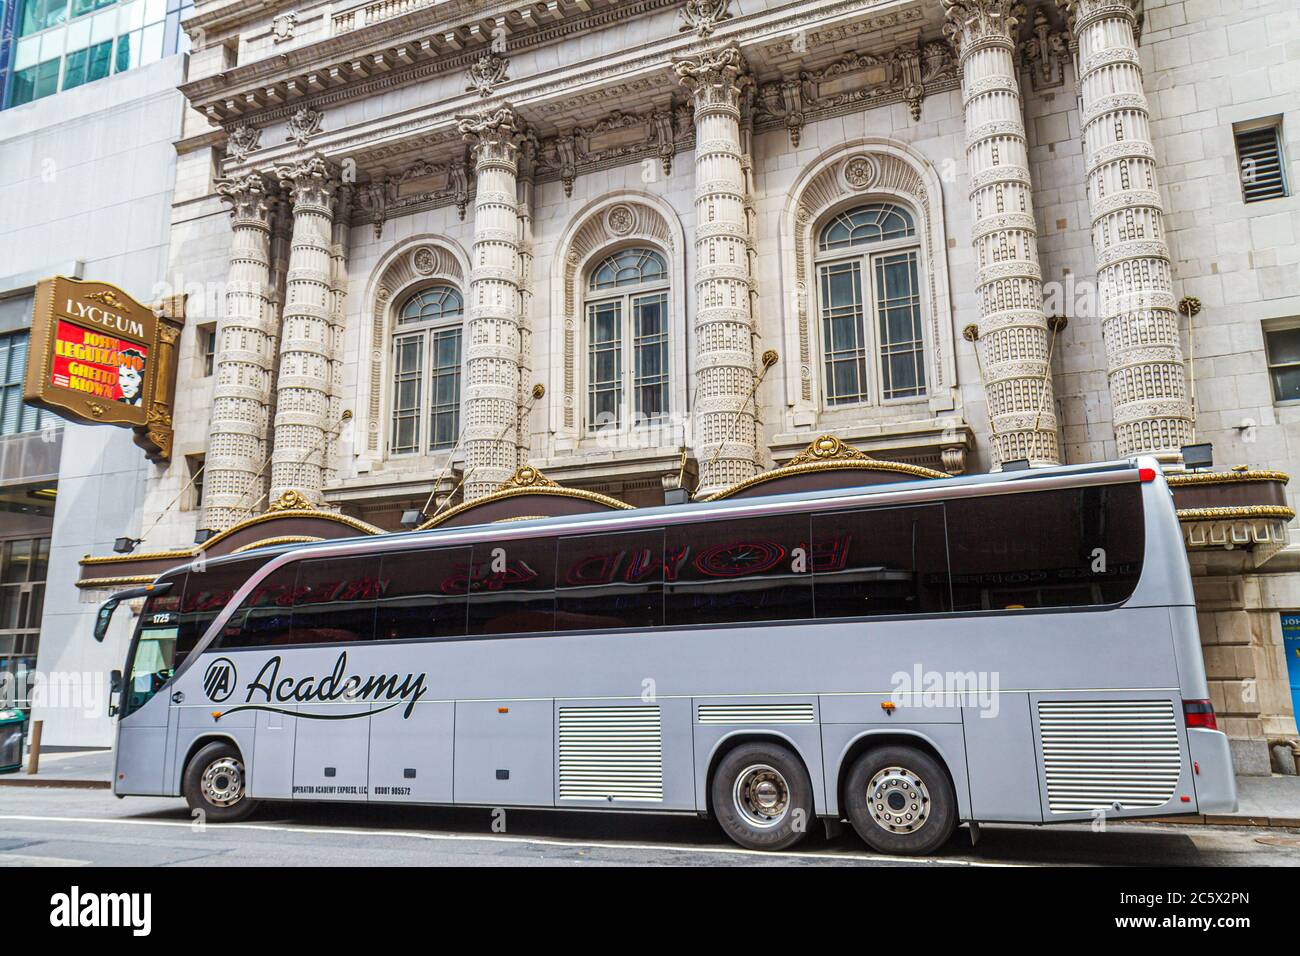 New York,New York City,NYC,Midtown,Manhattan,45th Street,Lyceum,Broadway Theatercharter bus,coach,Beaux Arts design,theatrical performance,coach,limo, Stock Photo